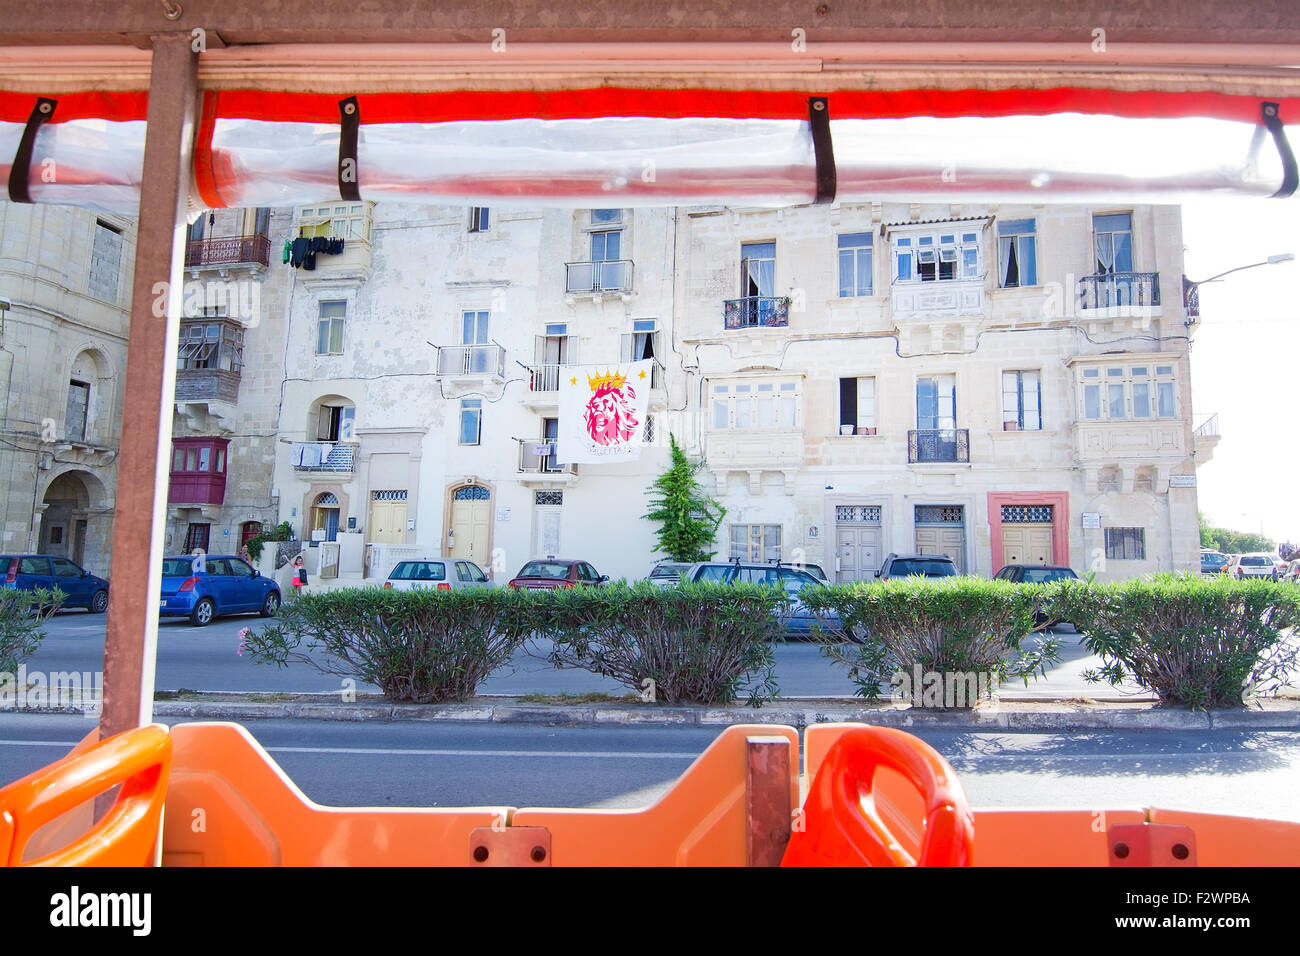 Valletta Football Club flag hanging from a balcony in the city Stock Photo